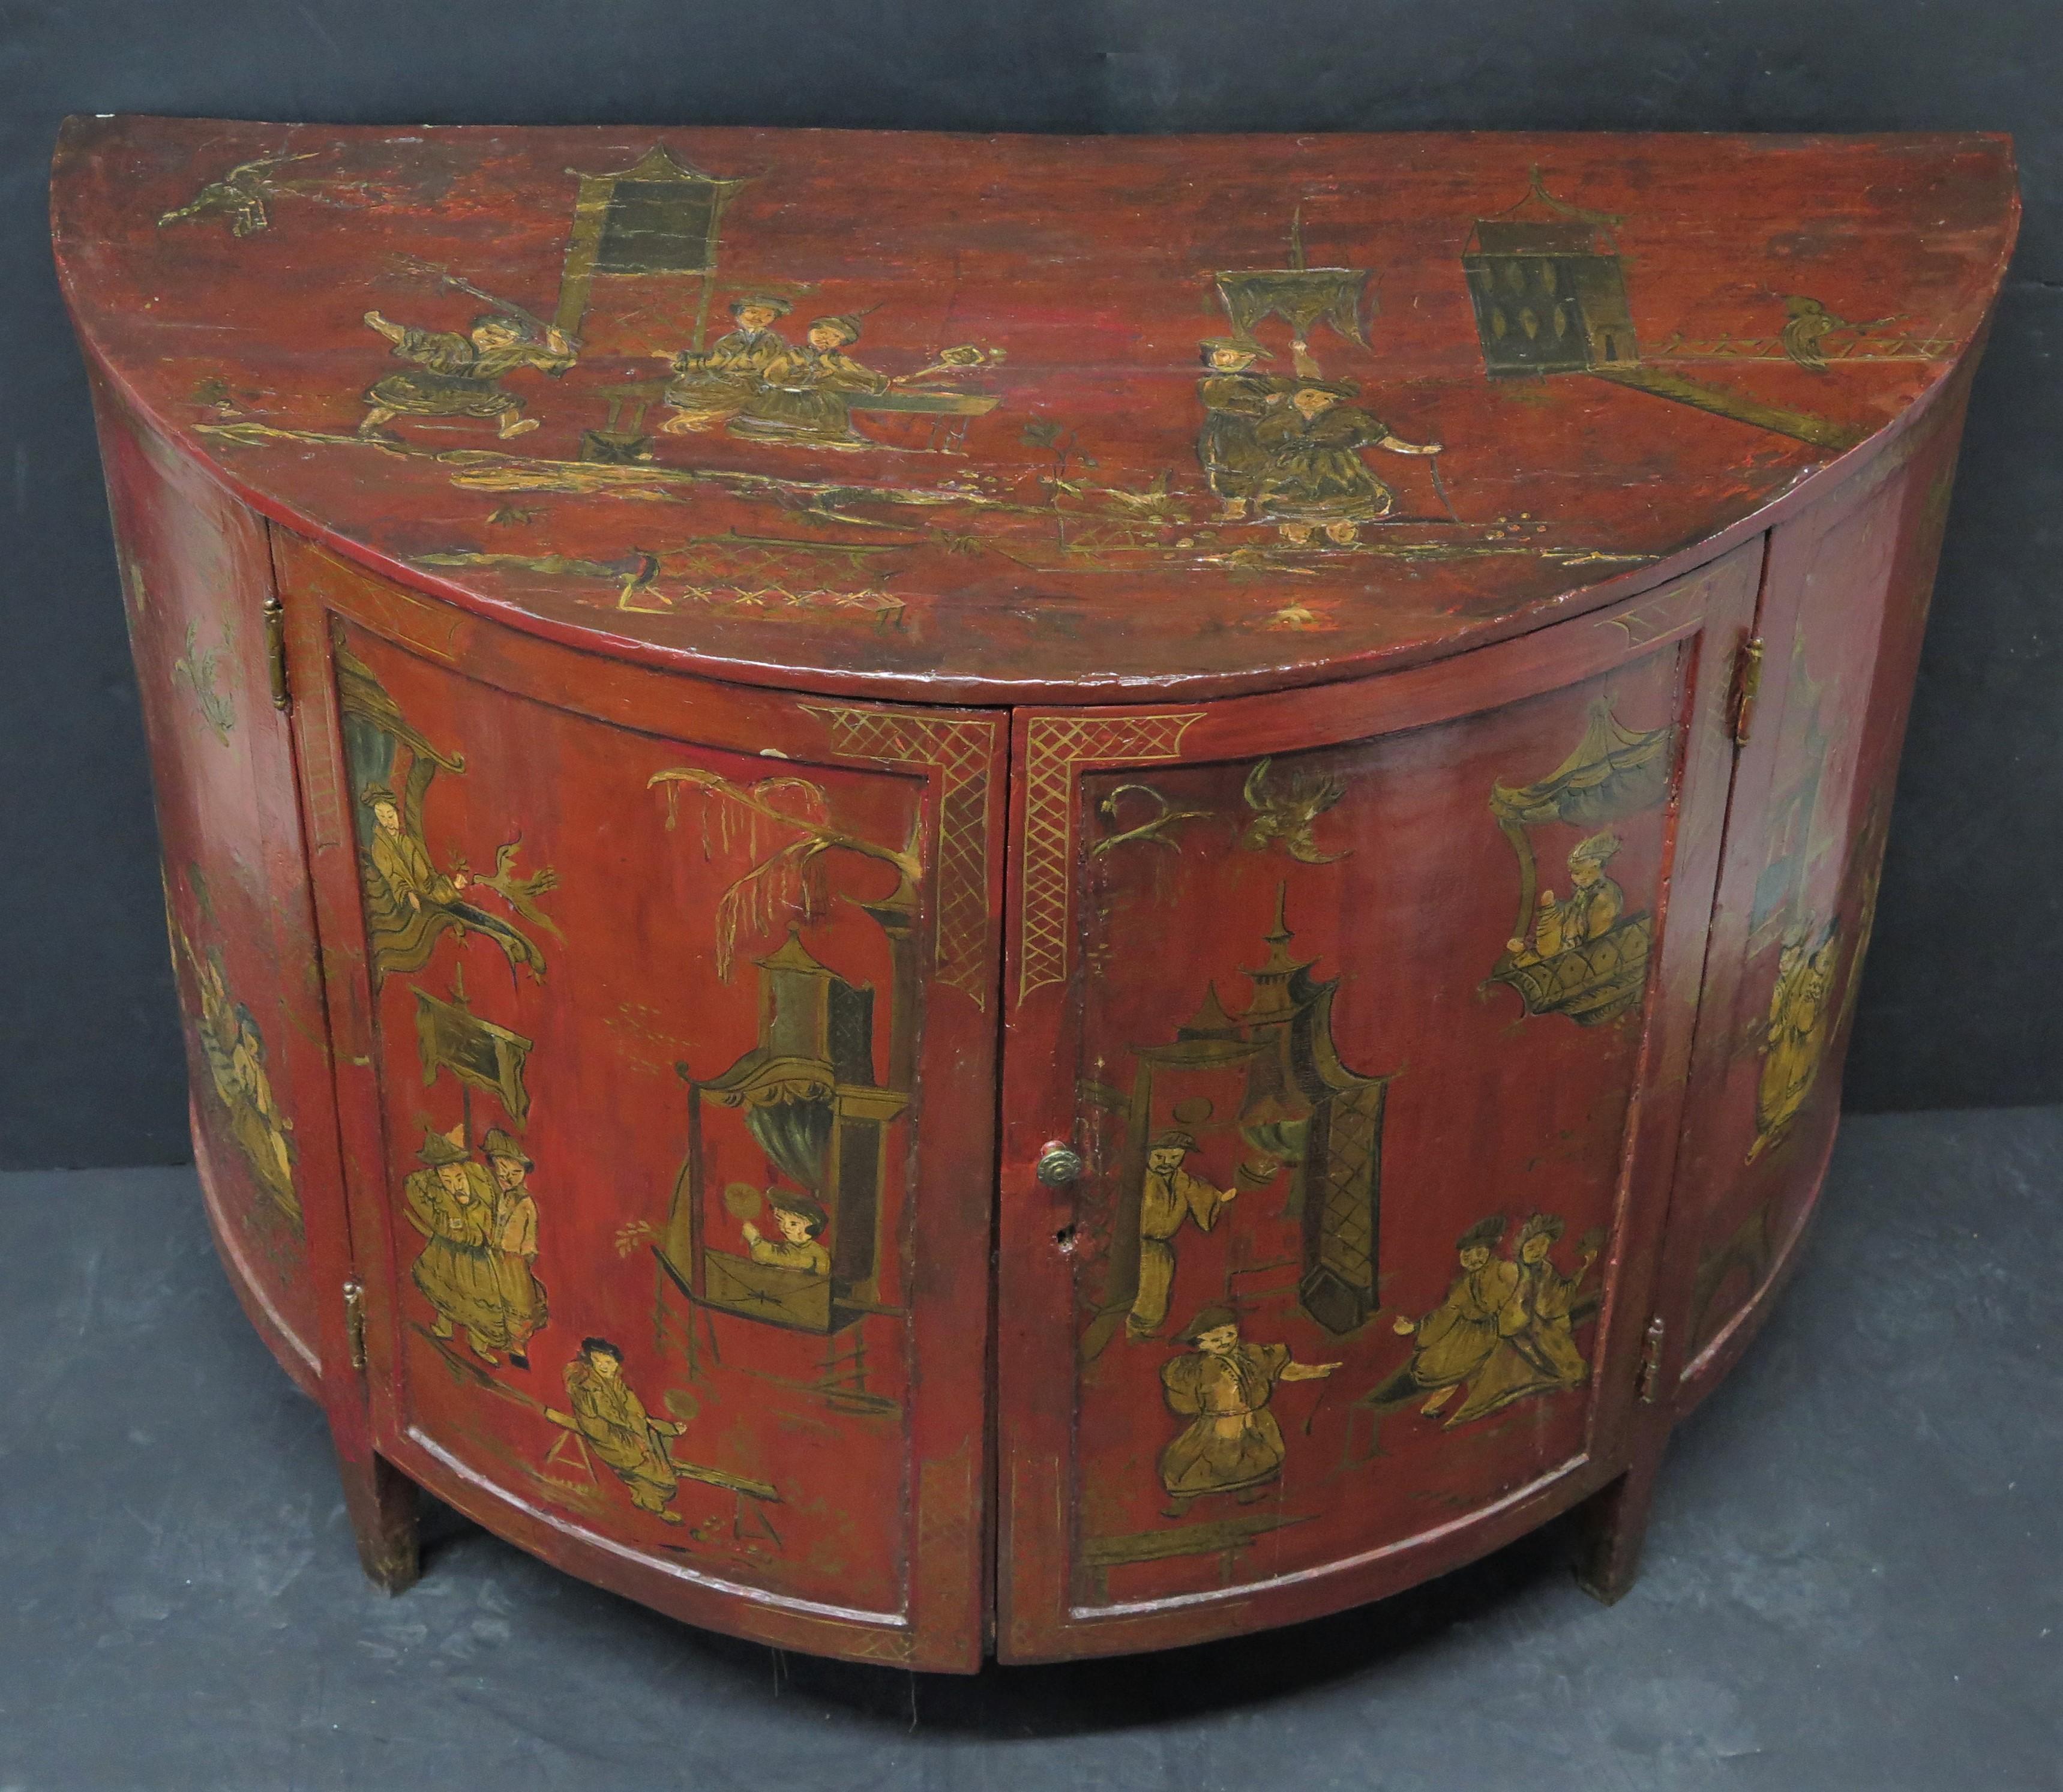 George III red laquered Chinoiserie demilune cabinet with hardwood applique and handpainting throughout, the whole stands on tapered feet, interior has one shelf and fabric throughout, England, 18th century